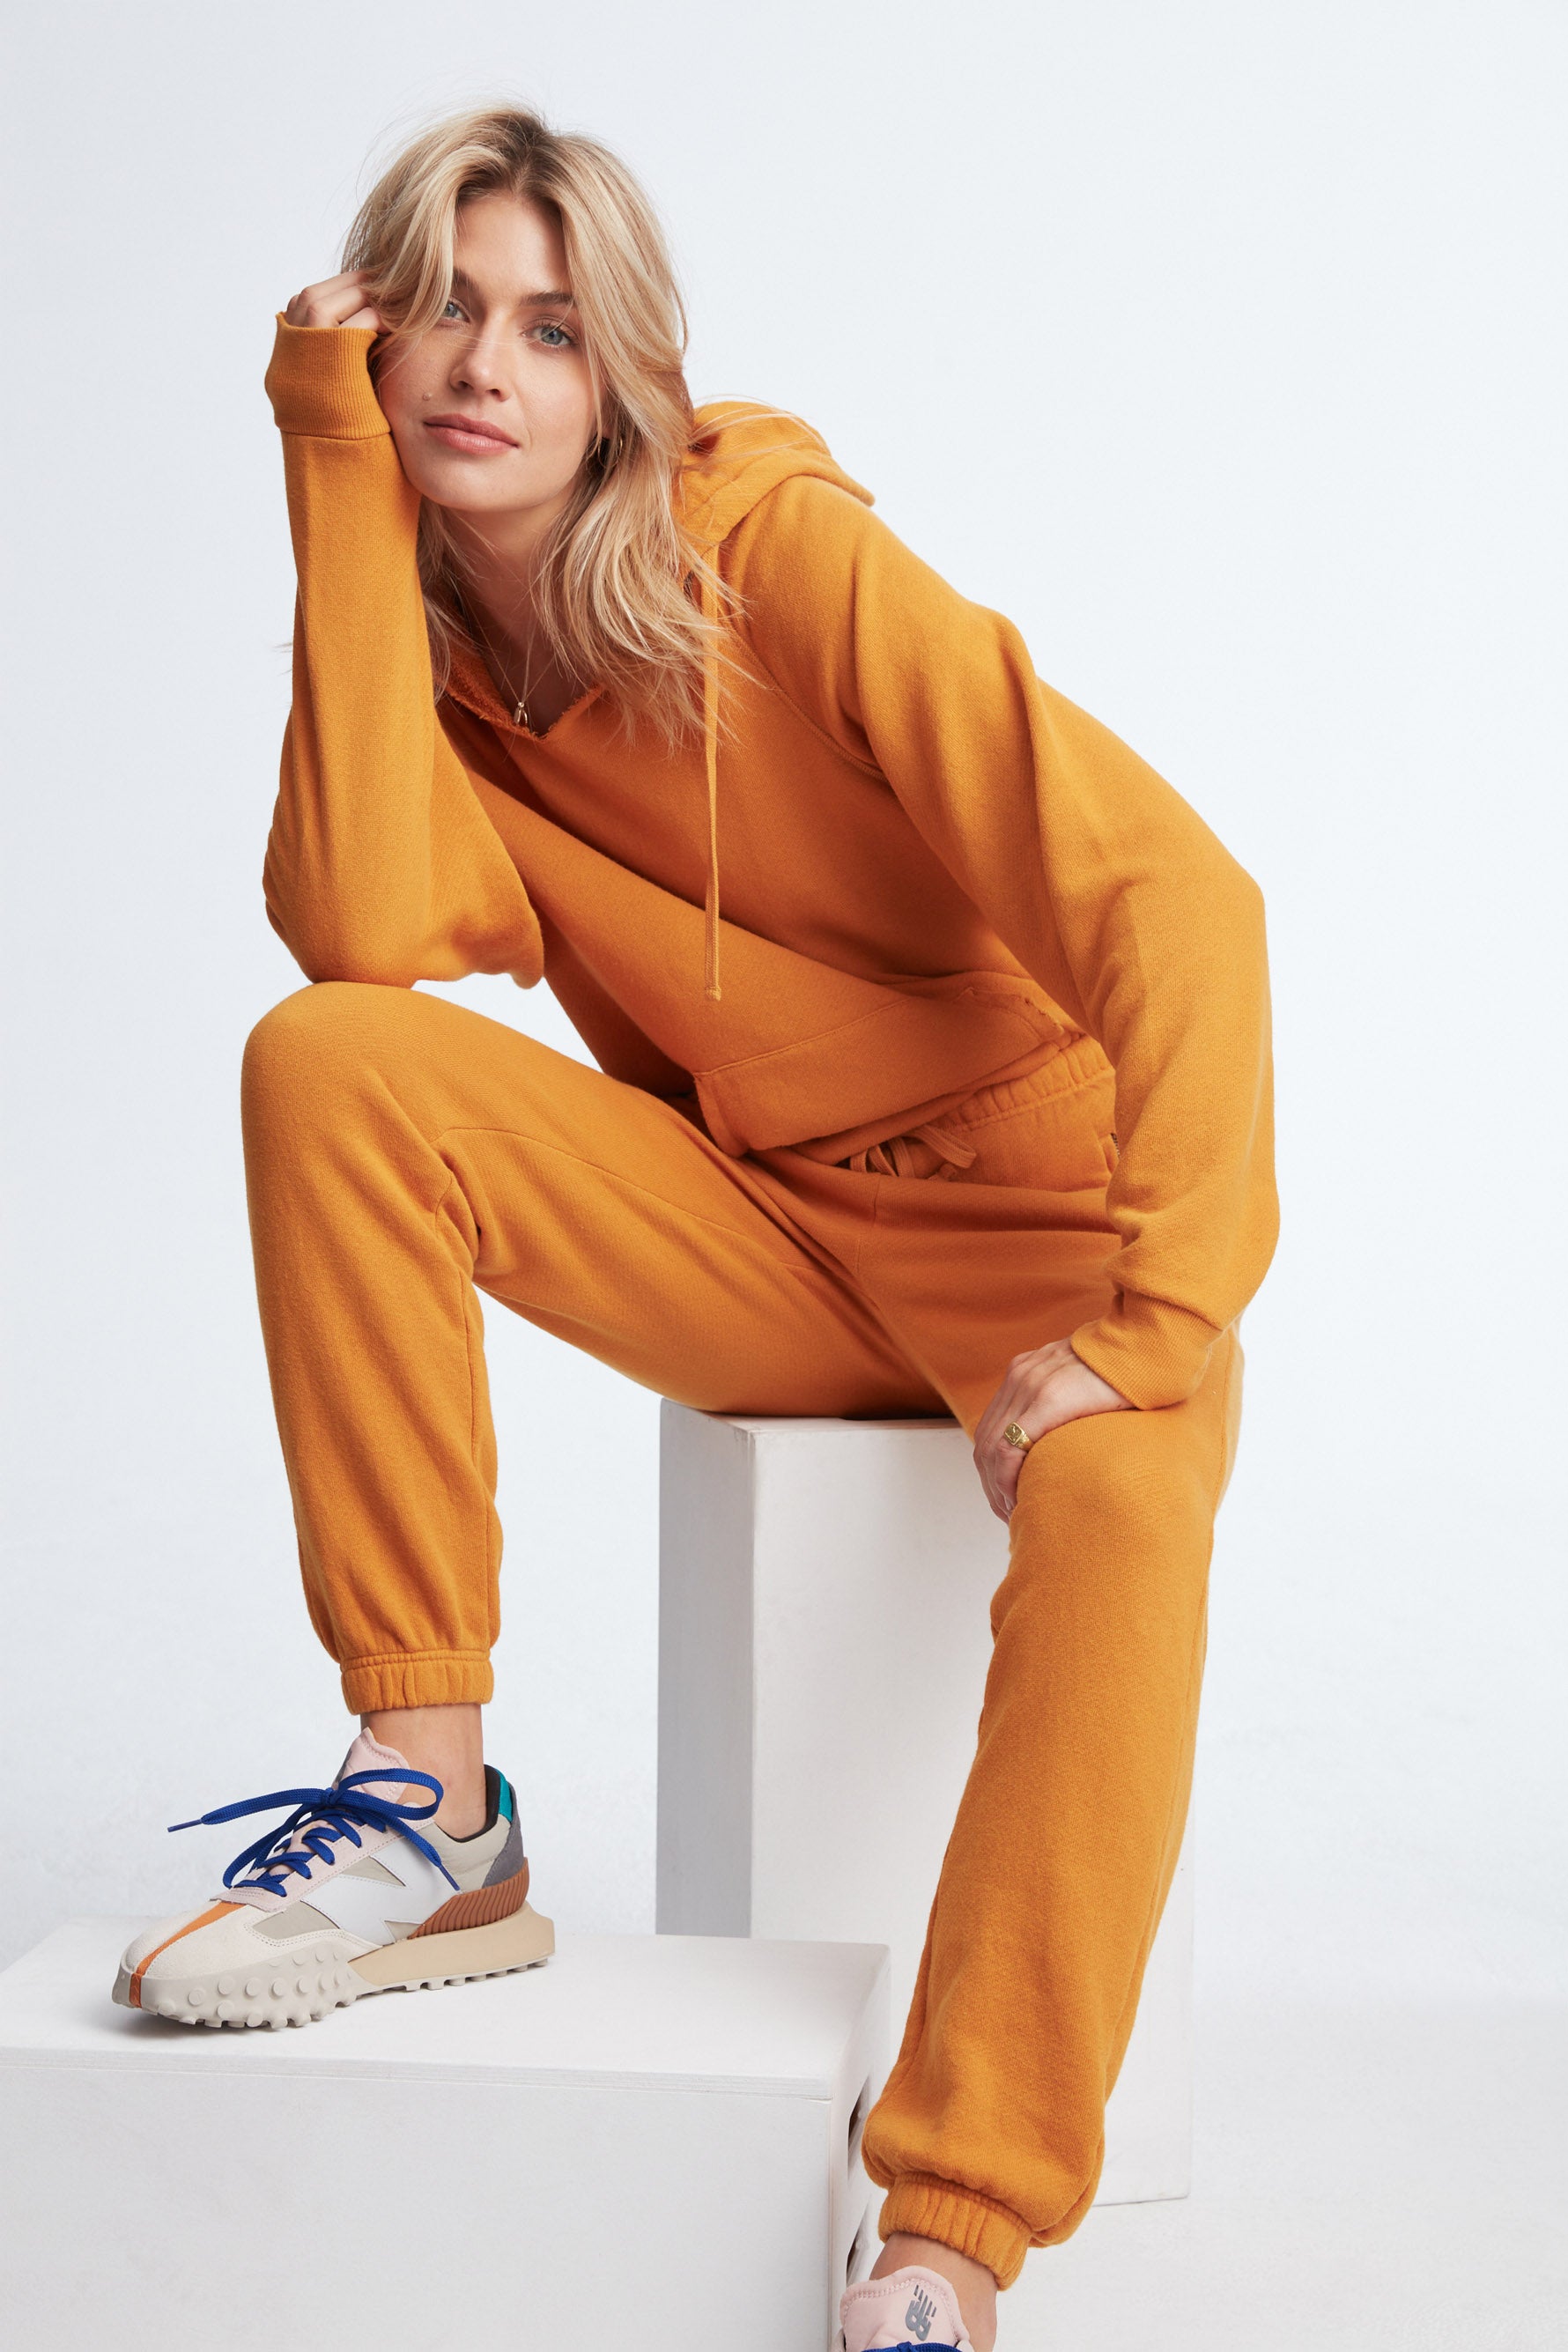 Jules - BANDIER The Bandier Sweatpant for Juniper Sincerely